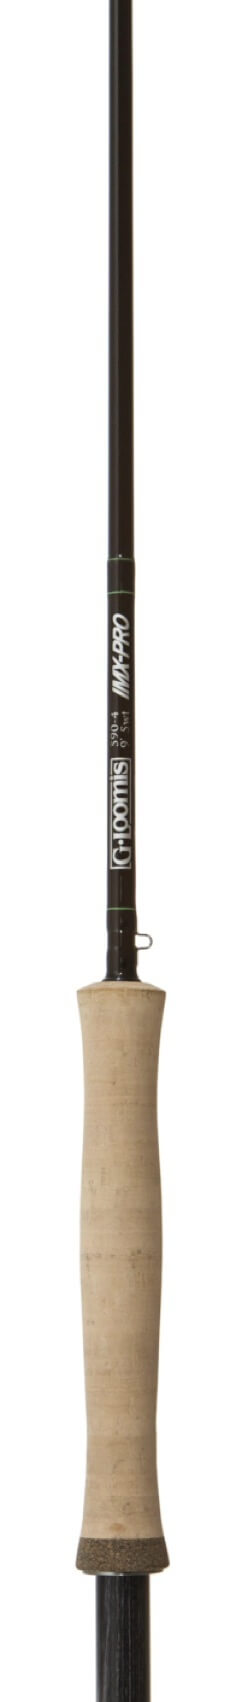 G-Loomis Fly Fishing Rods - TackleDirect